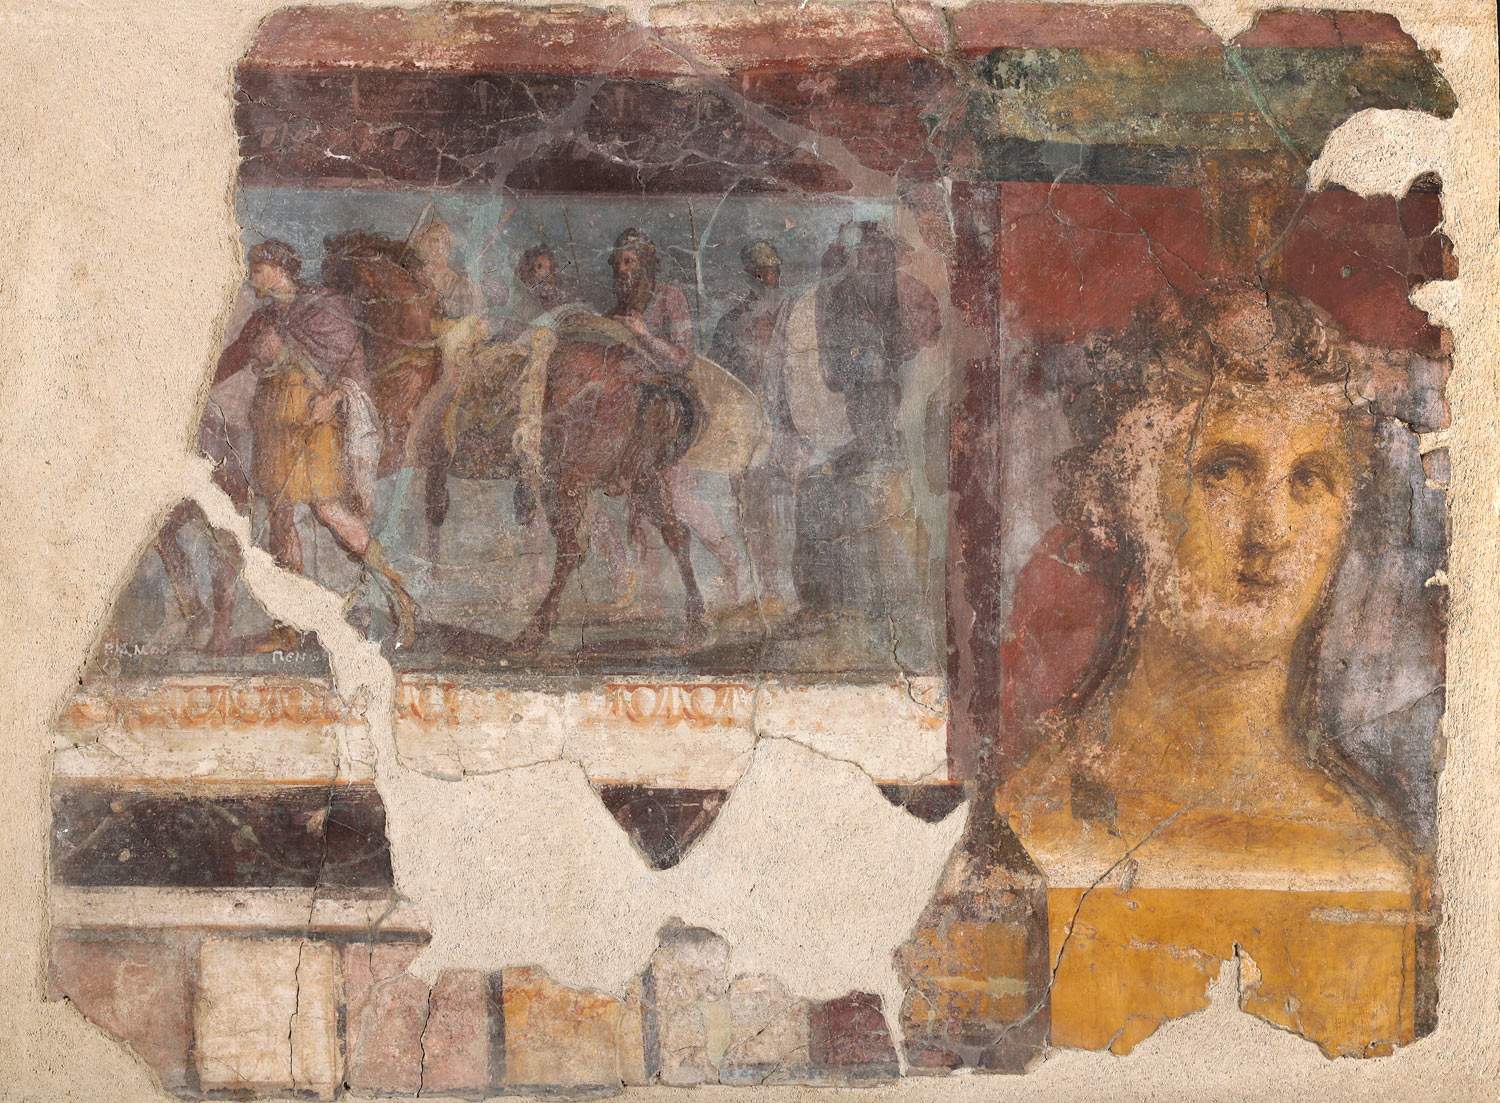 Turin, a major exhibition on Pompeii at Palazzo Madama with more than 120 works